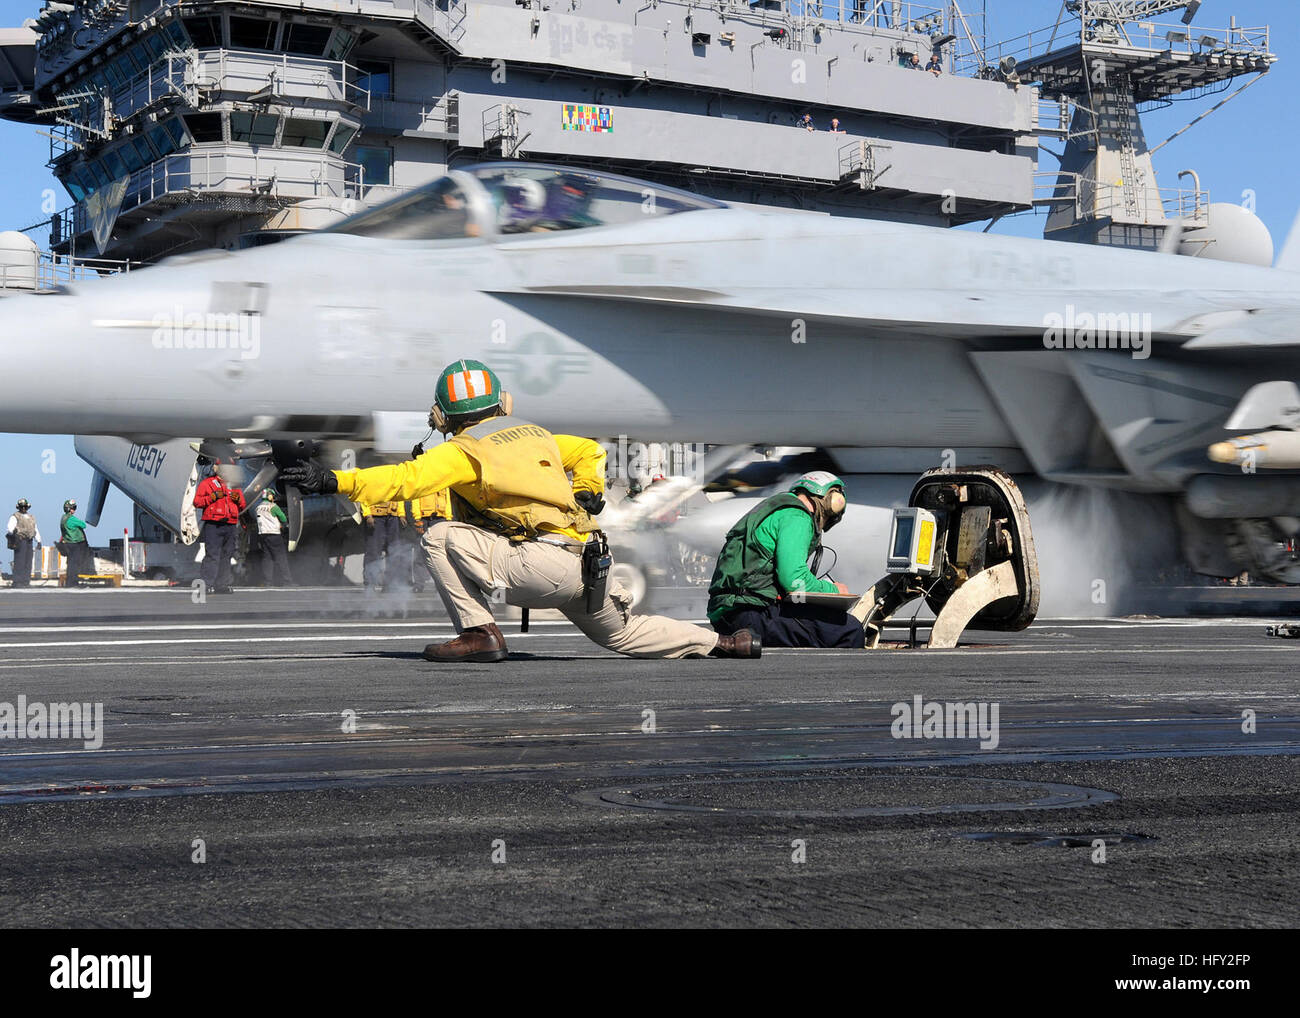 100220-N-4236E-225 GULF OF OMAN (Feb. 20, 2010) Lcdr. Kim DaCosta launches an F/A-18E Super Hornet assigned to the Pukin Dogs of Strike Fighter Squadron (VFA) 143 from the Nimitz-class aircraft carrier USS Dwight D. Eisenhower (CVN 69). Dwight D. Eisenhower is on a scheduled six-month deployment as part of the on-going rotation of forward-deployed forces. (U.S. Navy photo by Mass Communication Specialist 3rd Class Chad R. Erdmann/Released) US Navy 100220-N-4236E-225 Lcdr. Kim DaCosta launches an F-A-18E Super Hornet assigned to the Pukin Dogs of Strike Fighter Squadron (VFA) 143 from the Nimit Stock Photo